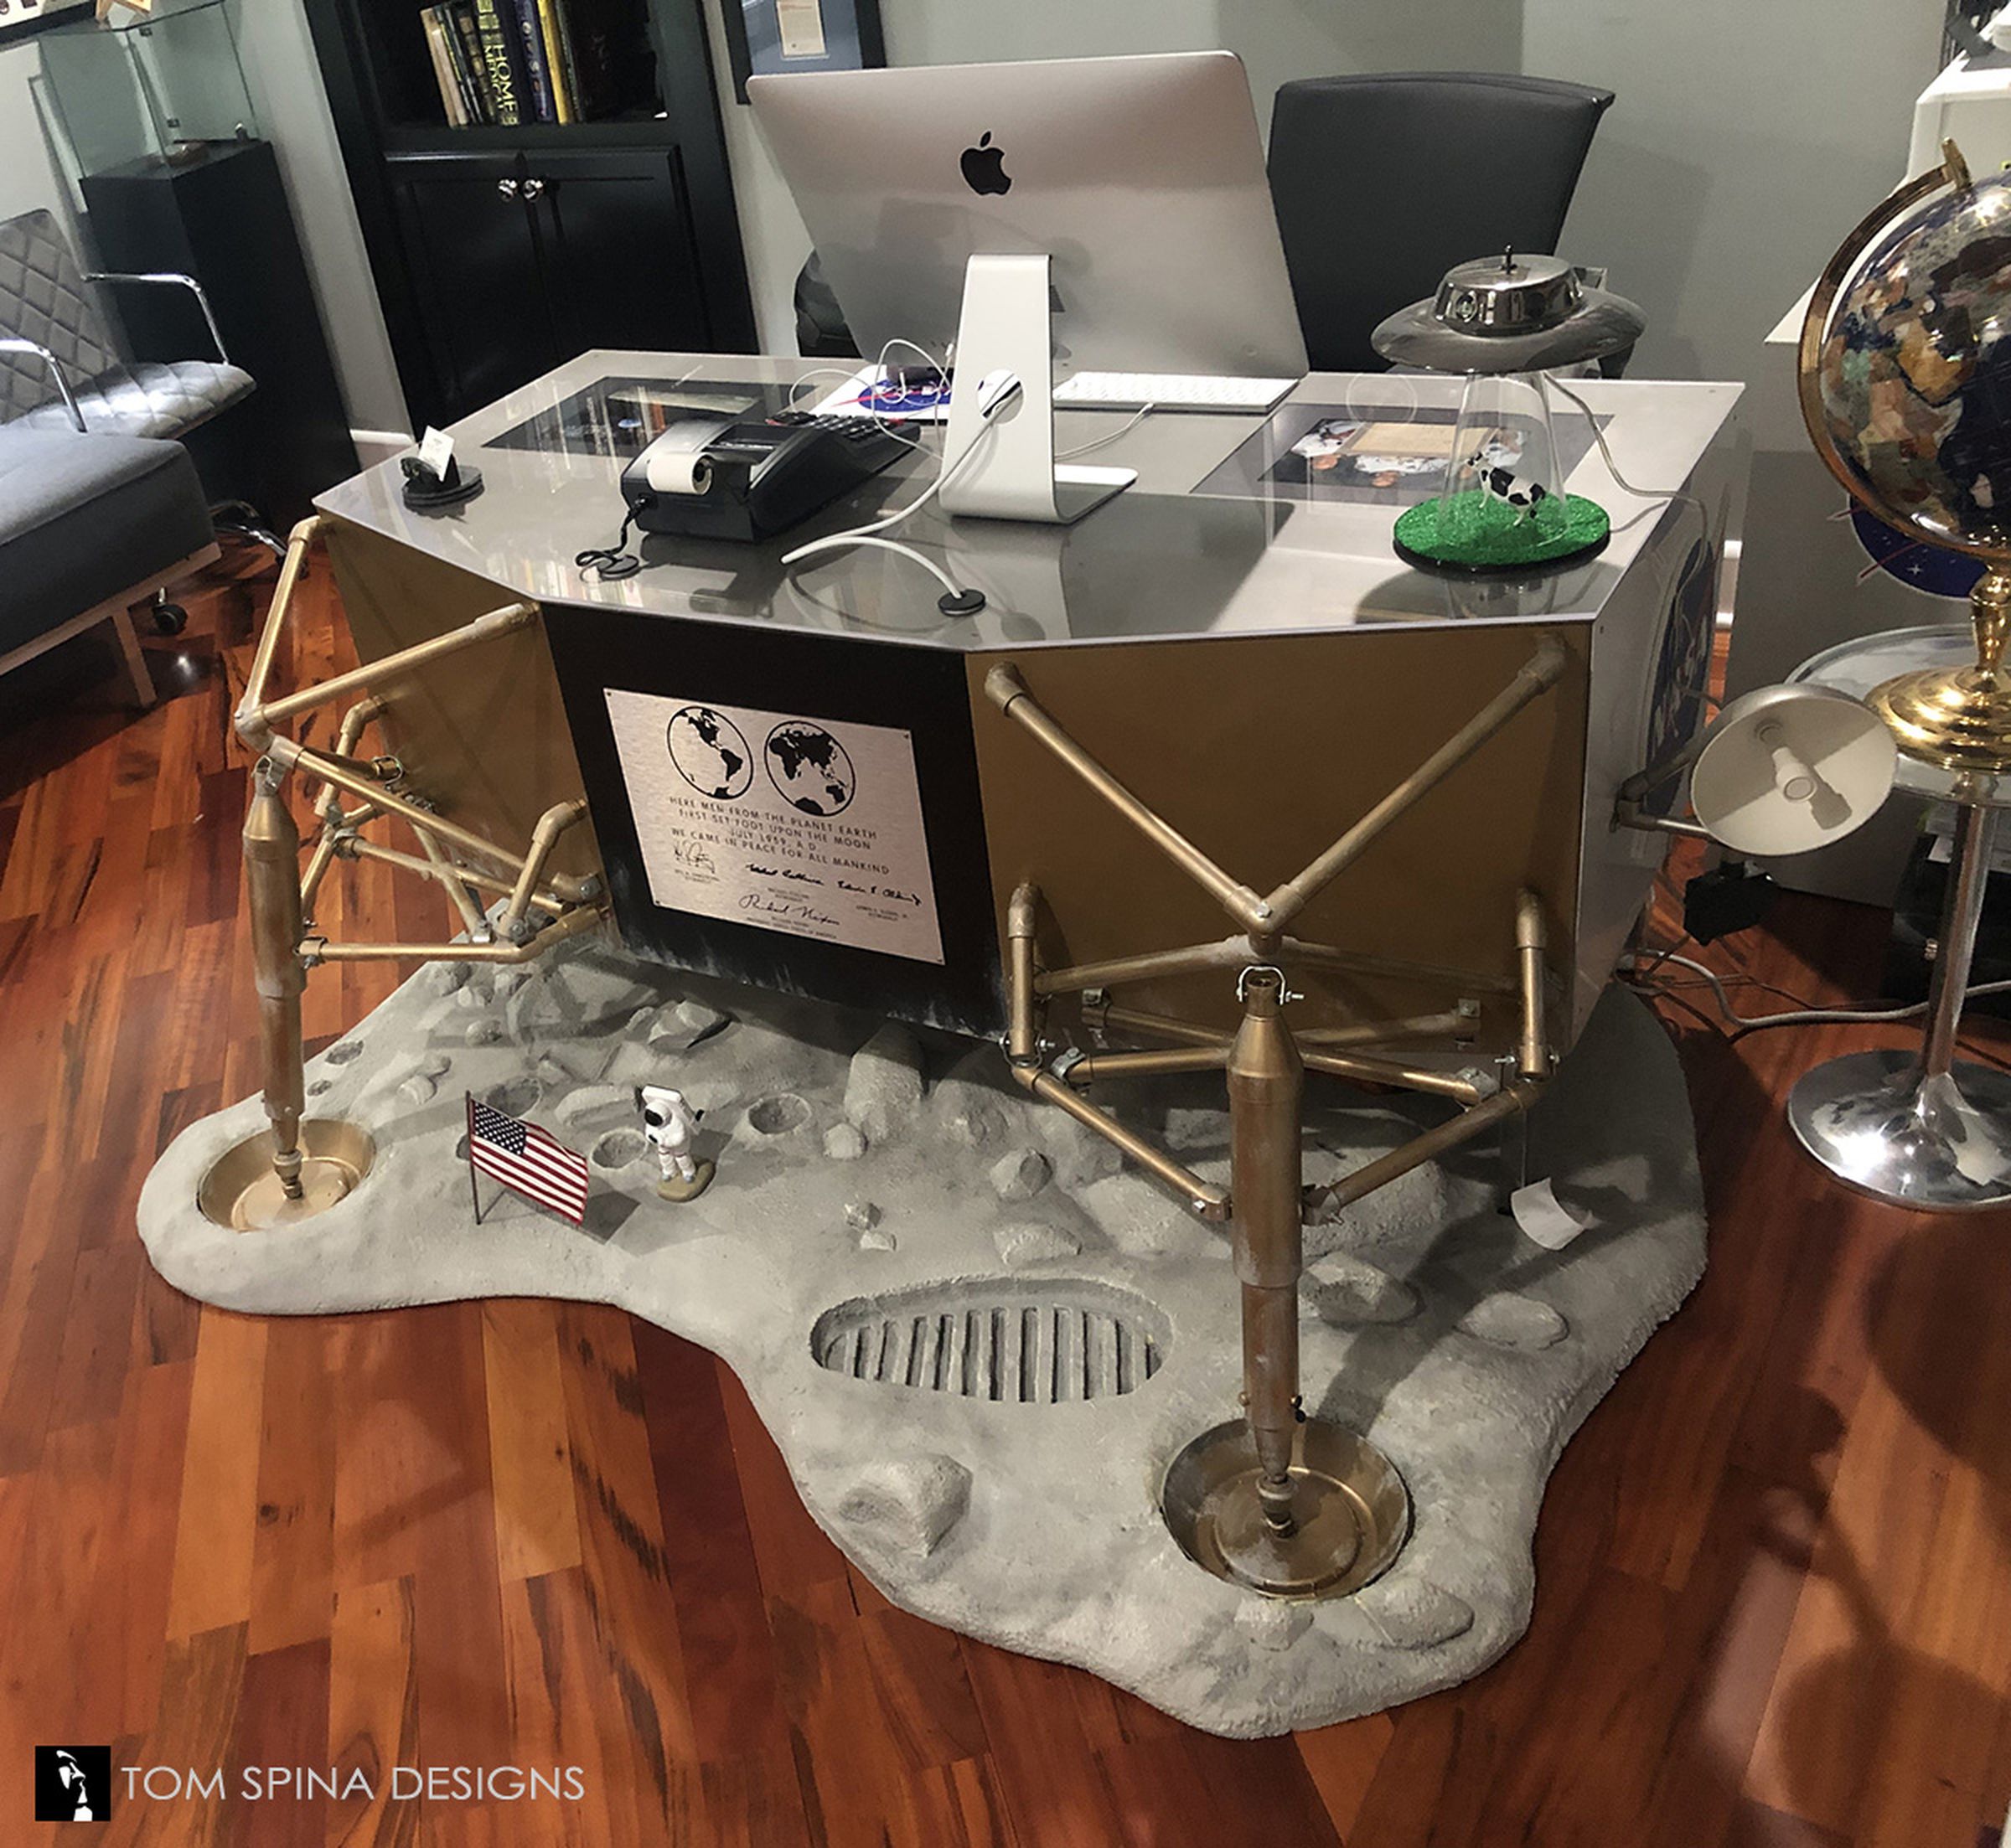 A desk made to look like the Apollo 11 lunar lander